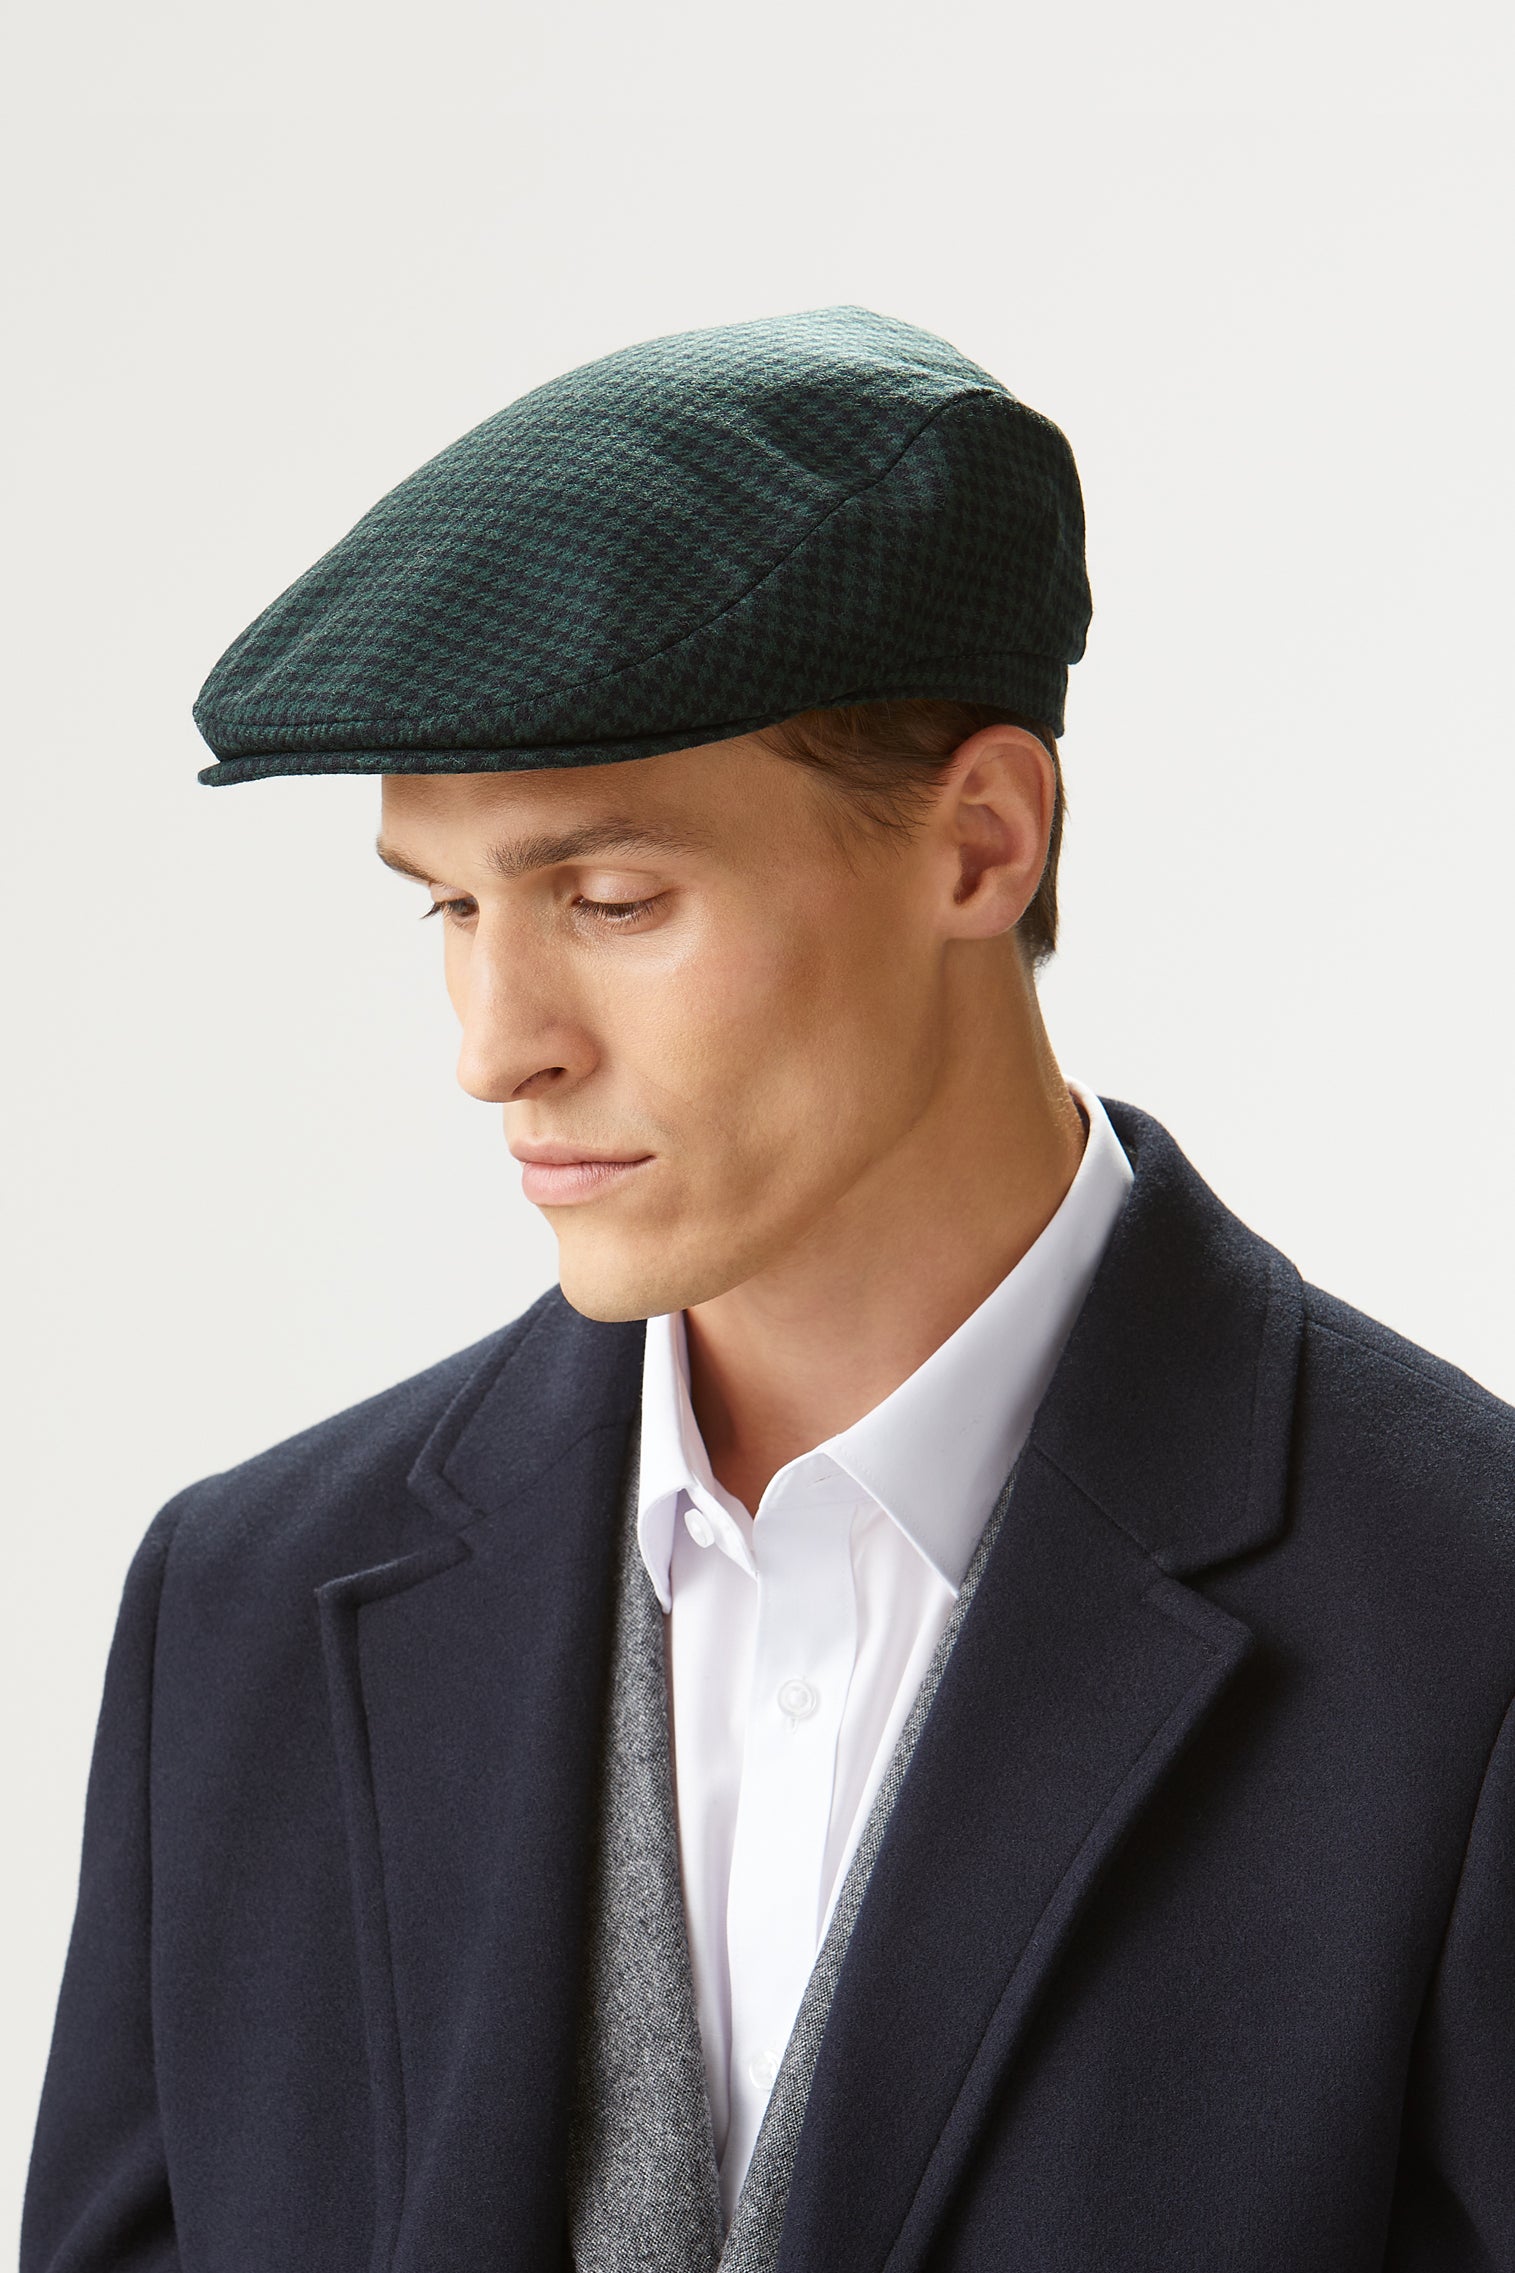 Grosvenor Houndstooth Flat Cap - Products - Lock & Co. Hatters London UK